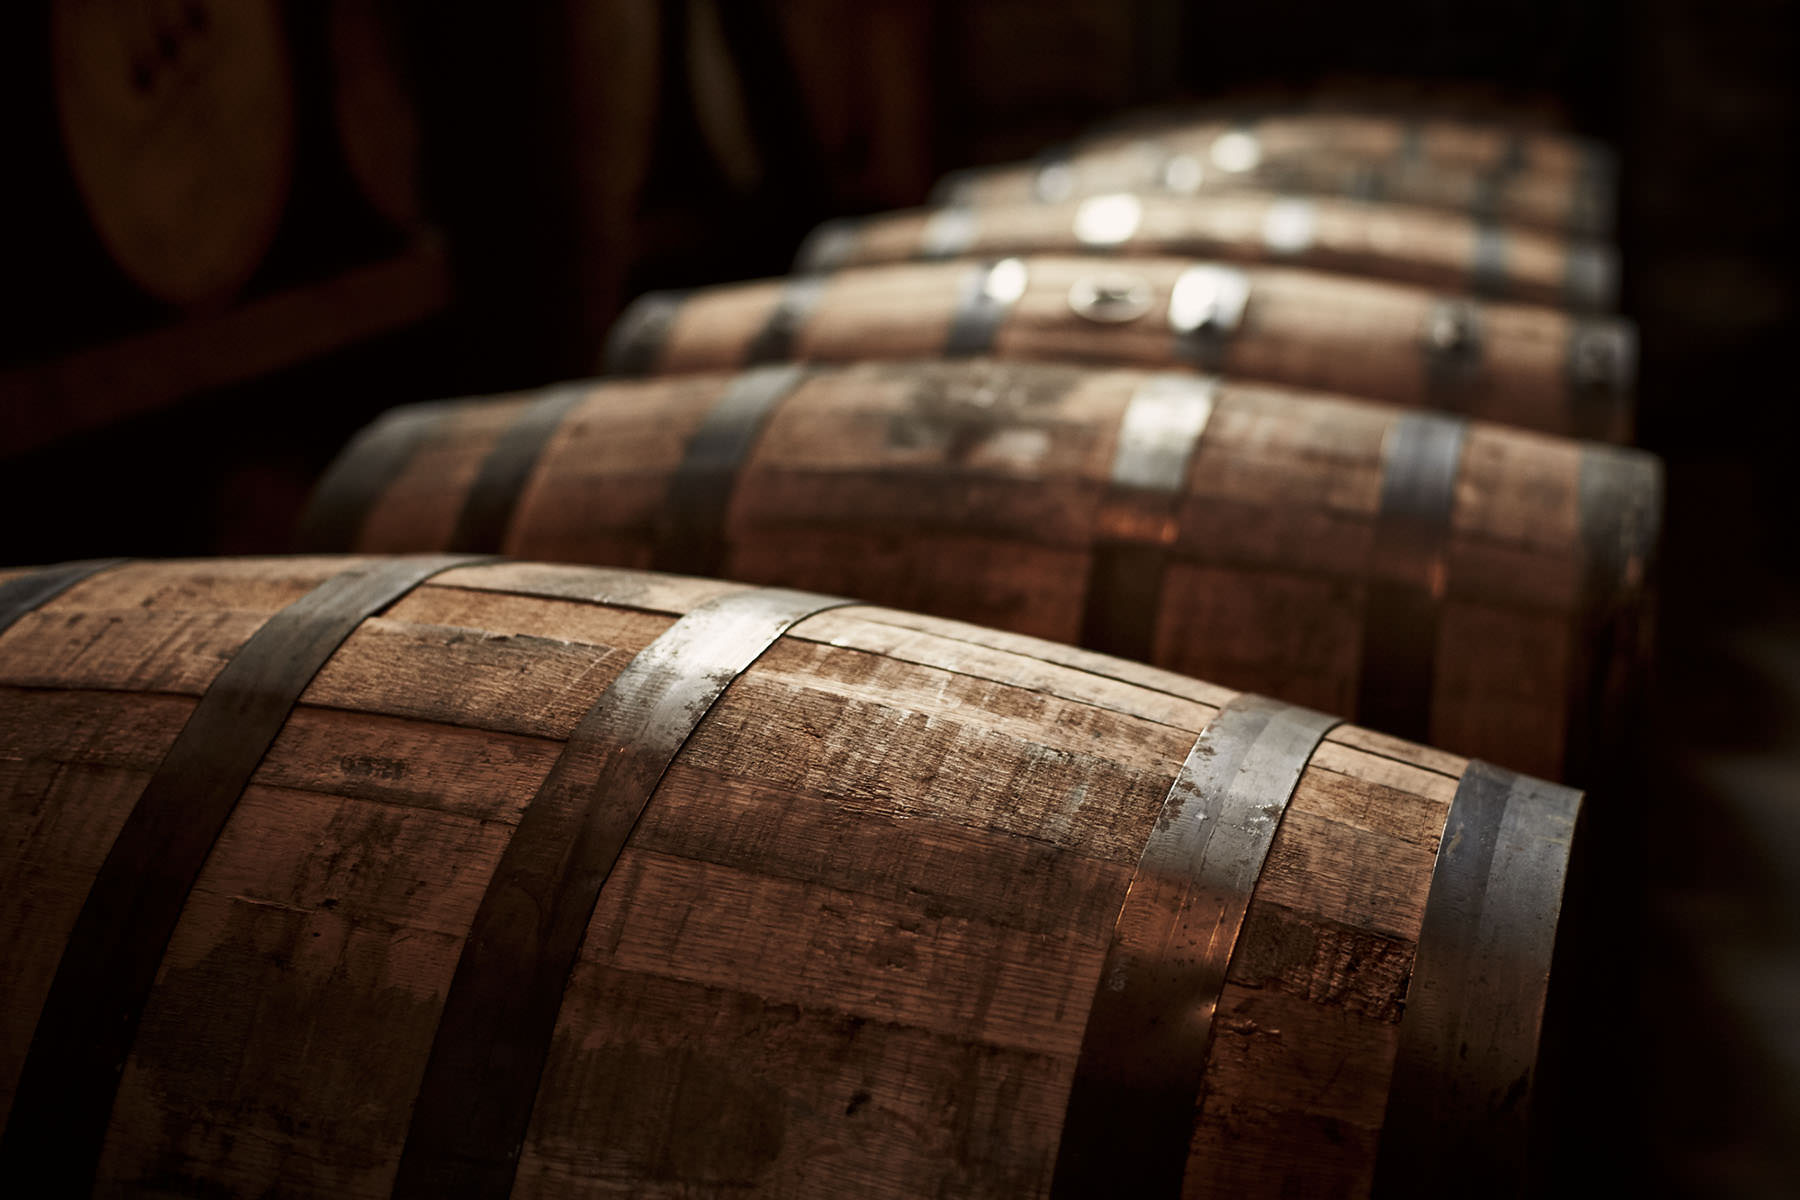 Ottawa editorial photographer, Burbon Barrels taken in Tennessee. These images add to Matthew